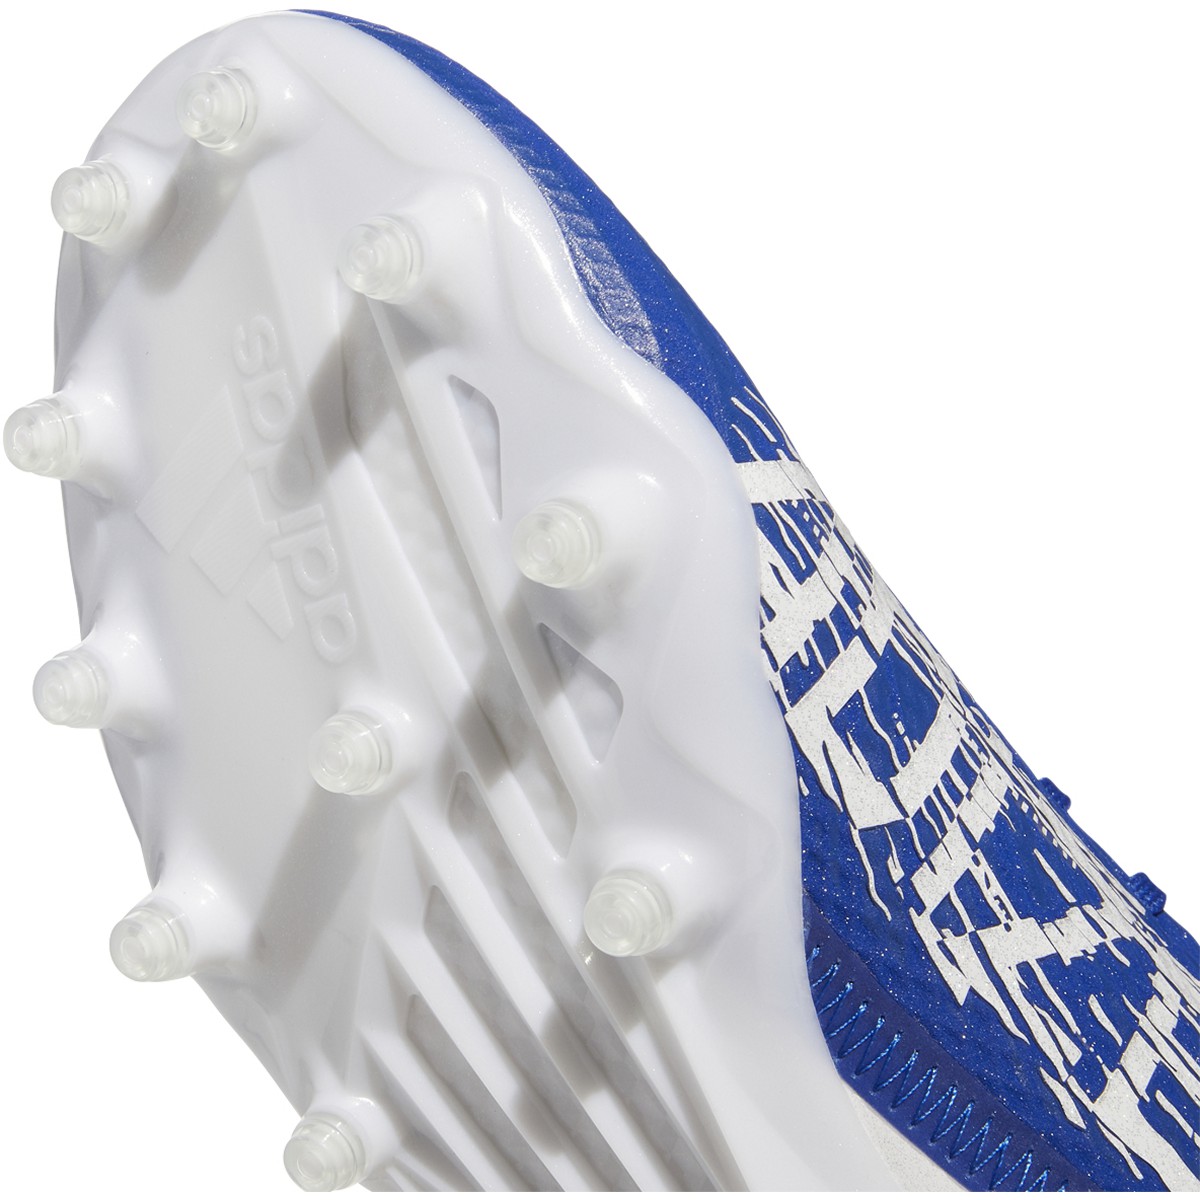 The Review of the Adidas Adizero Scorch Football Cleats - A Great ...